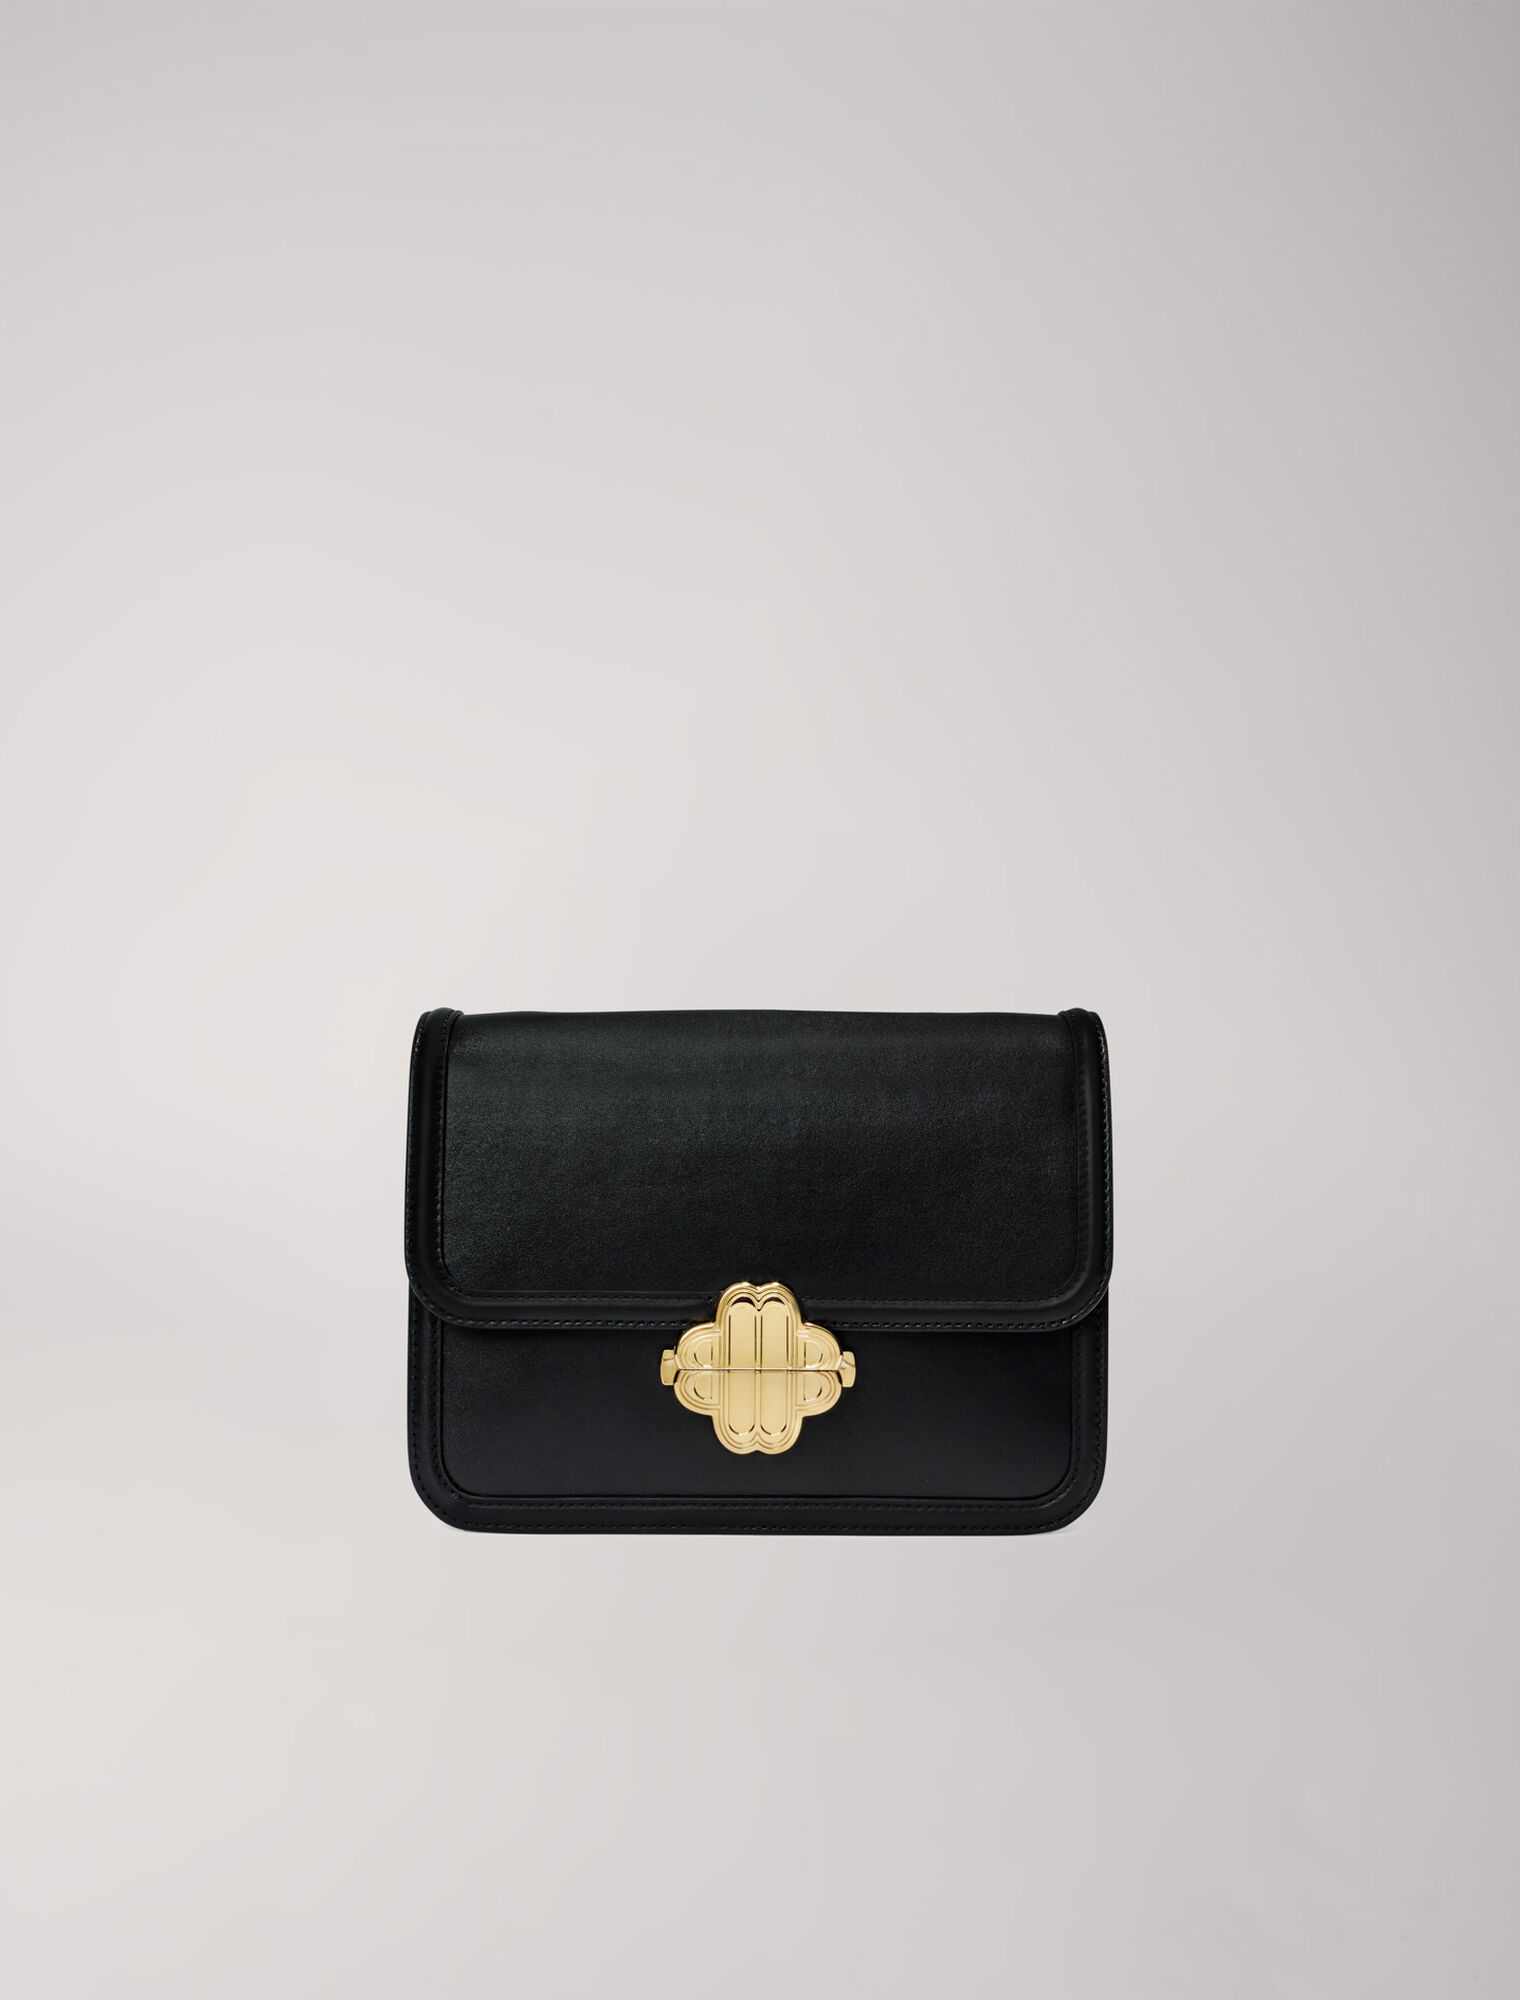 Leather bag with clover clasp